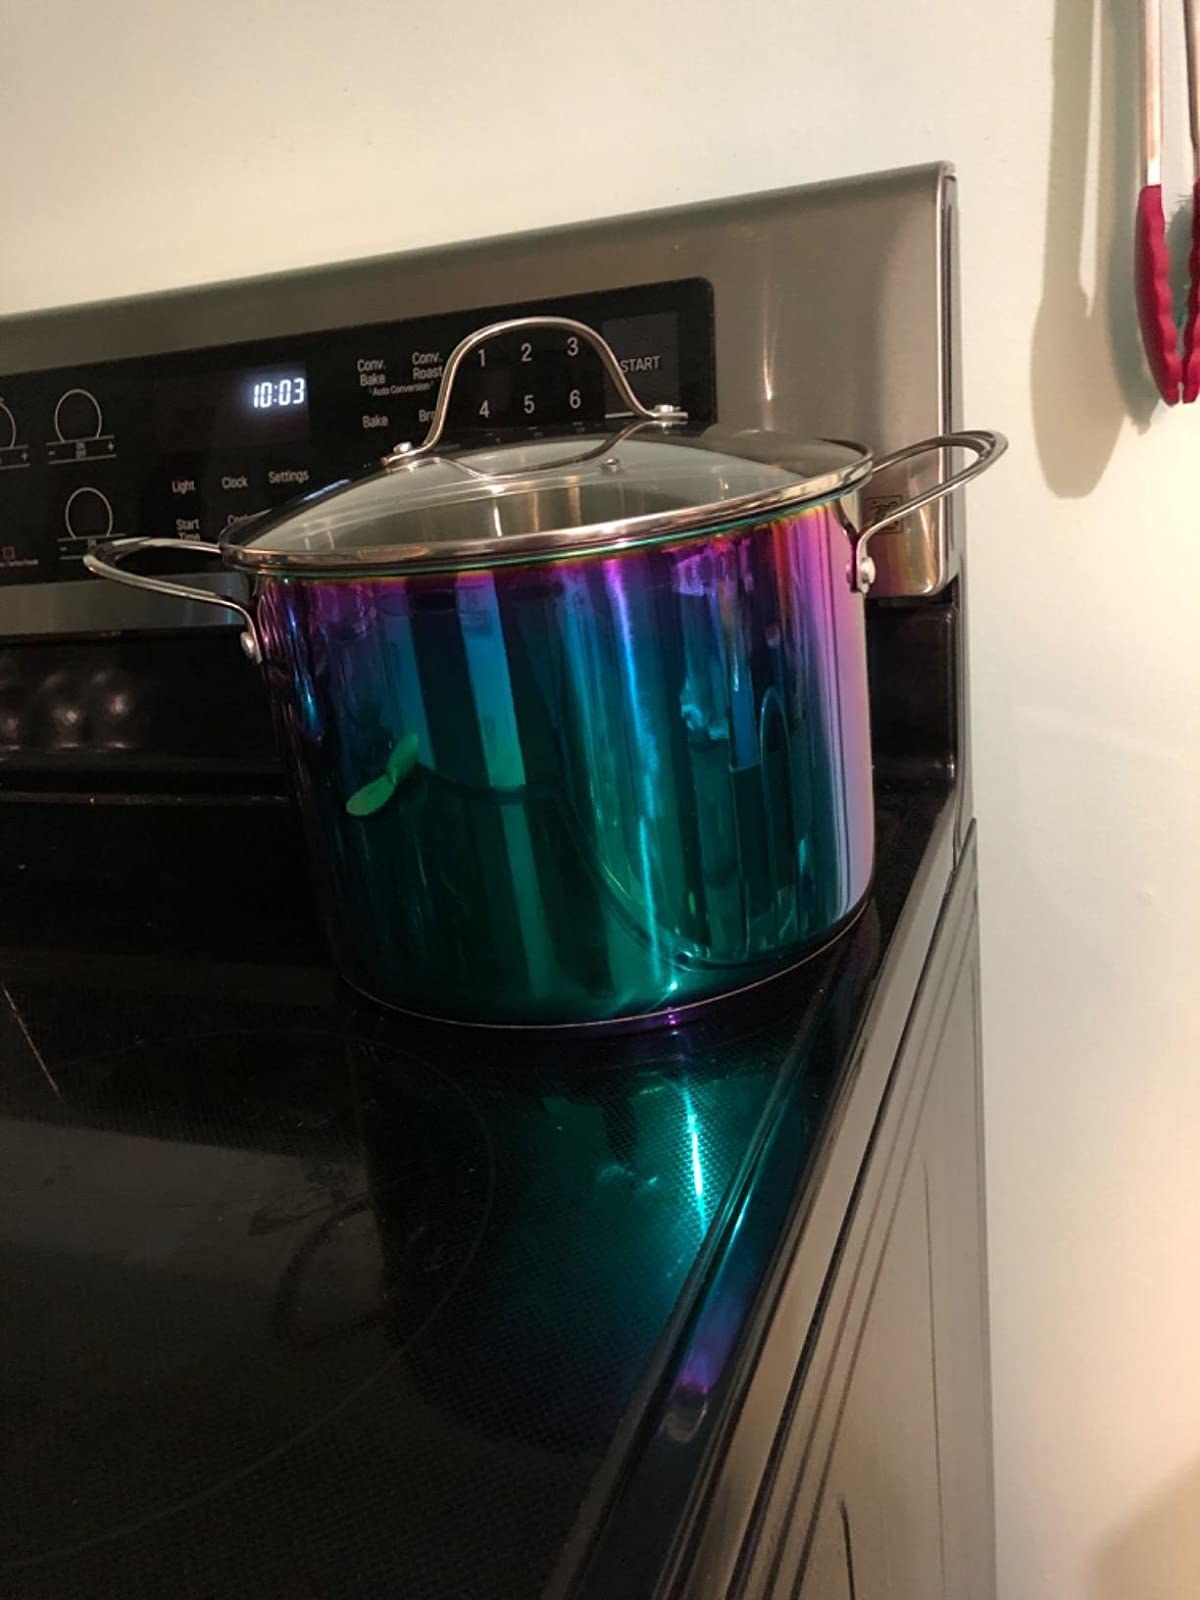 A reviewer photo of the pot, which has riveted handles and a rainbow-shimmer metallic color